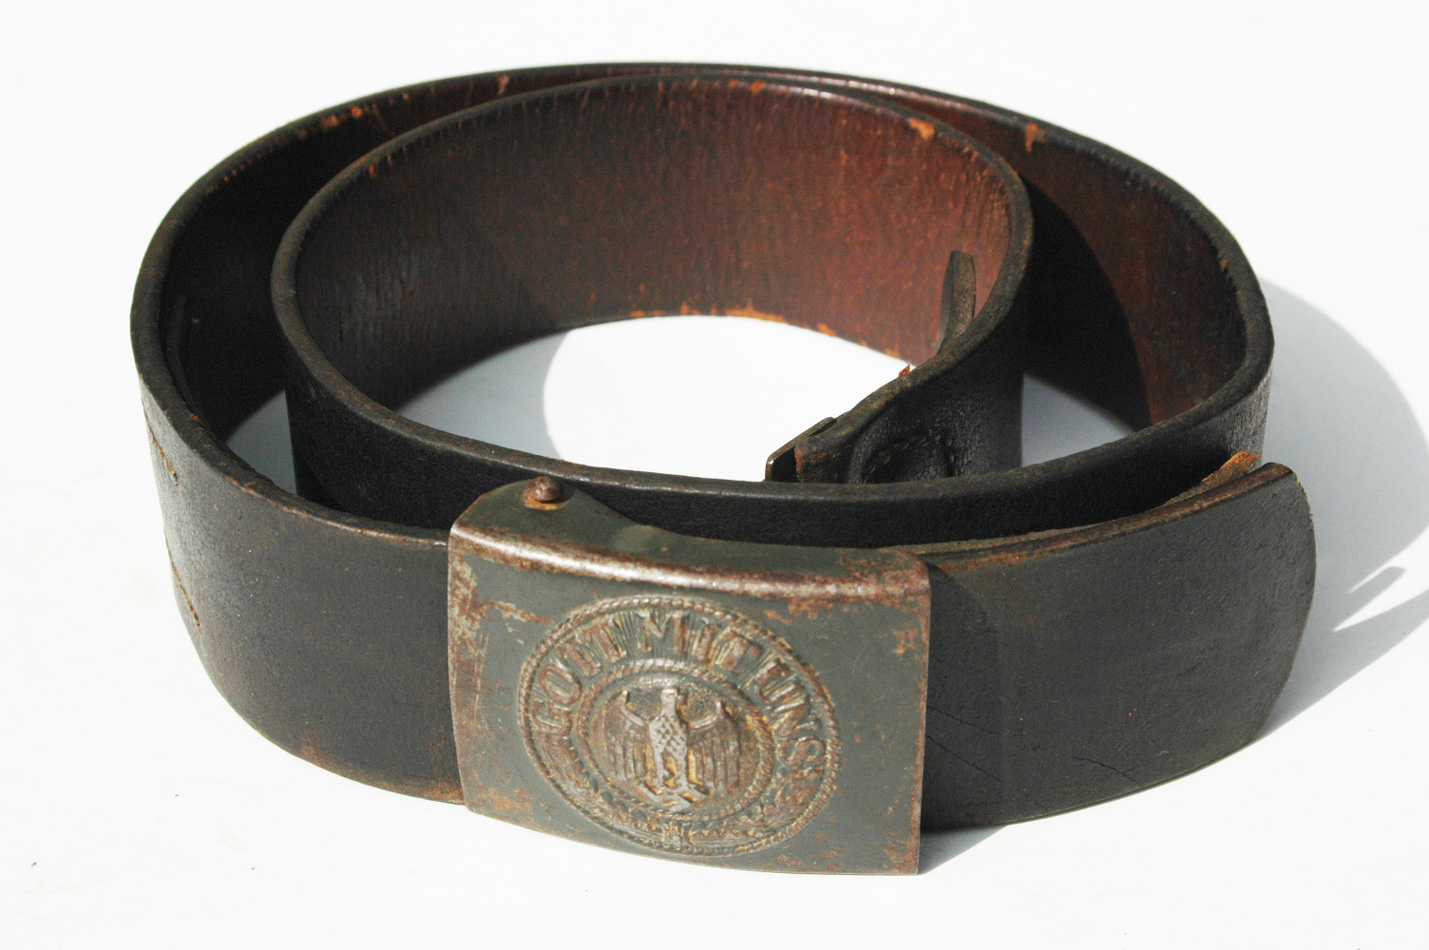 German WWII Army (HEER) Enlisted belt and Buckle